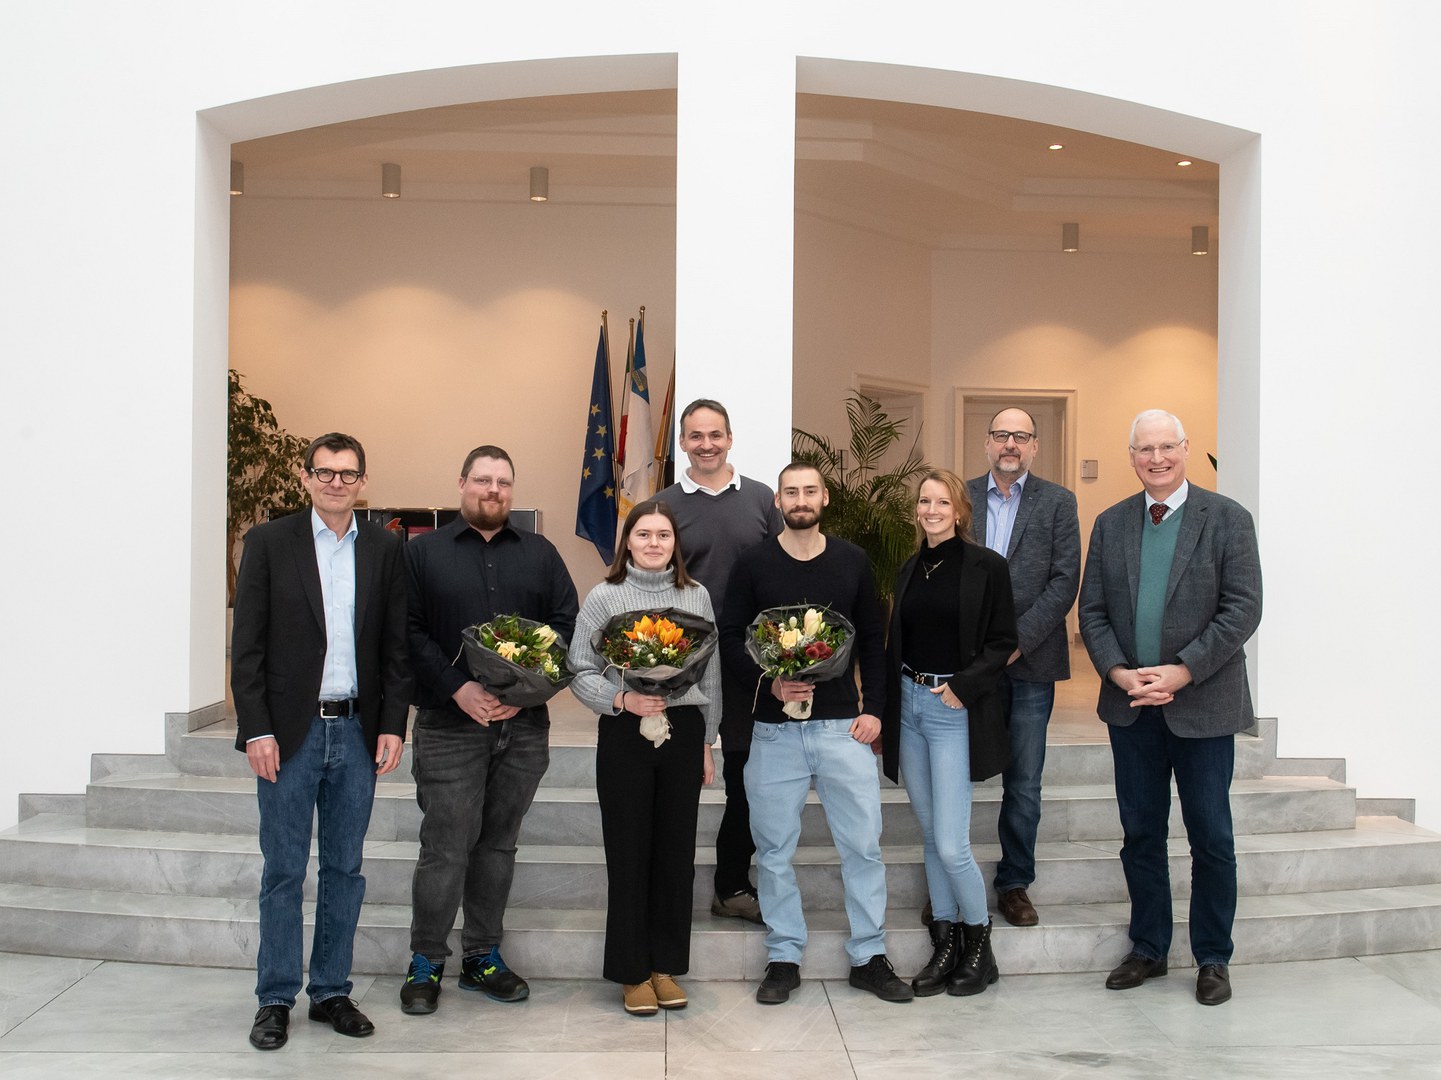 The University of Bonn is honoring four apprentices who came out of their apprenticeships top of their training year.